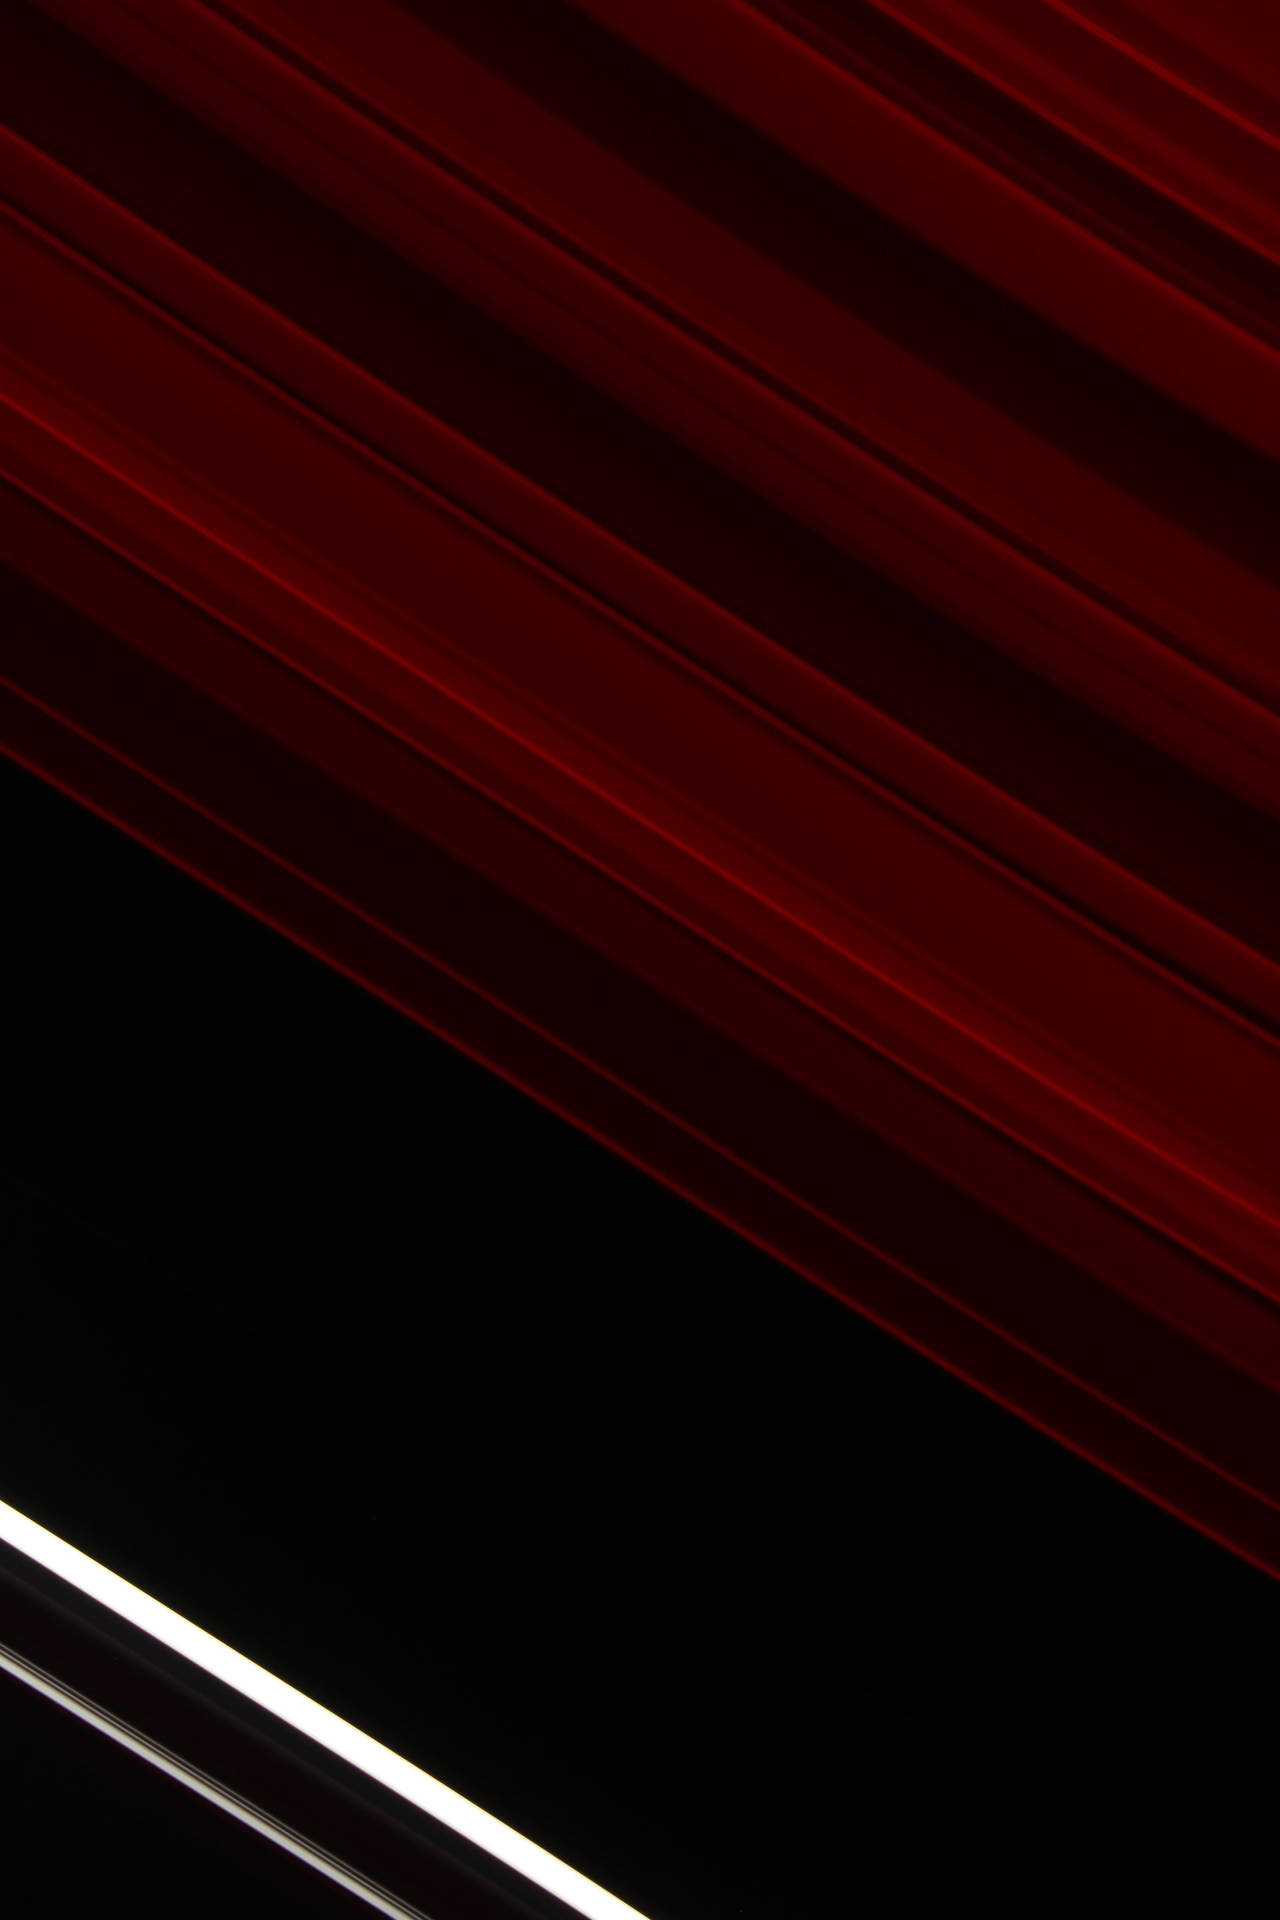 Red And White Lines Black Aesthetic Tumblr Iphone Wallpaper